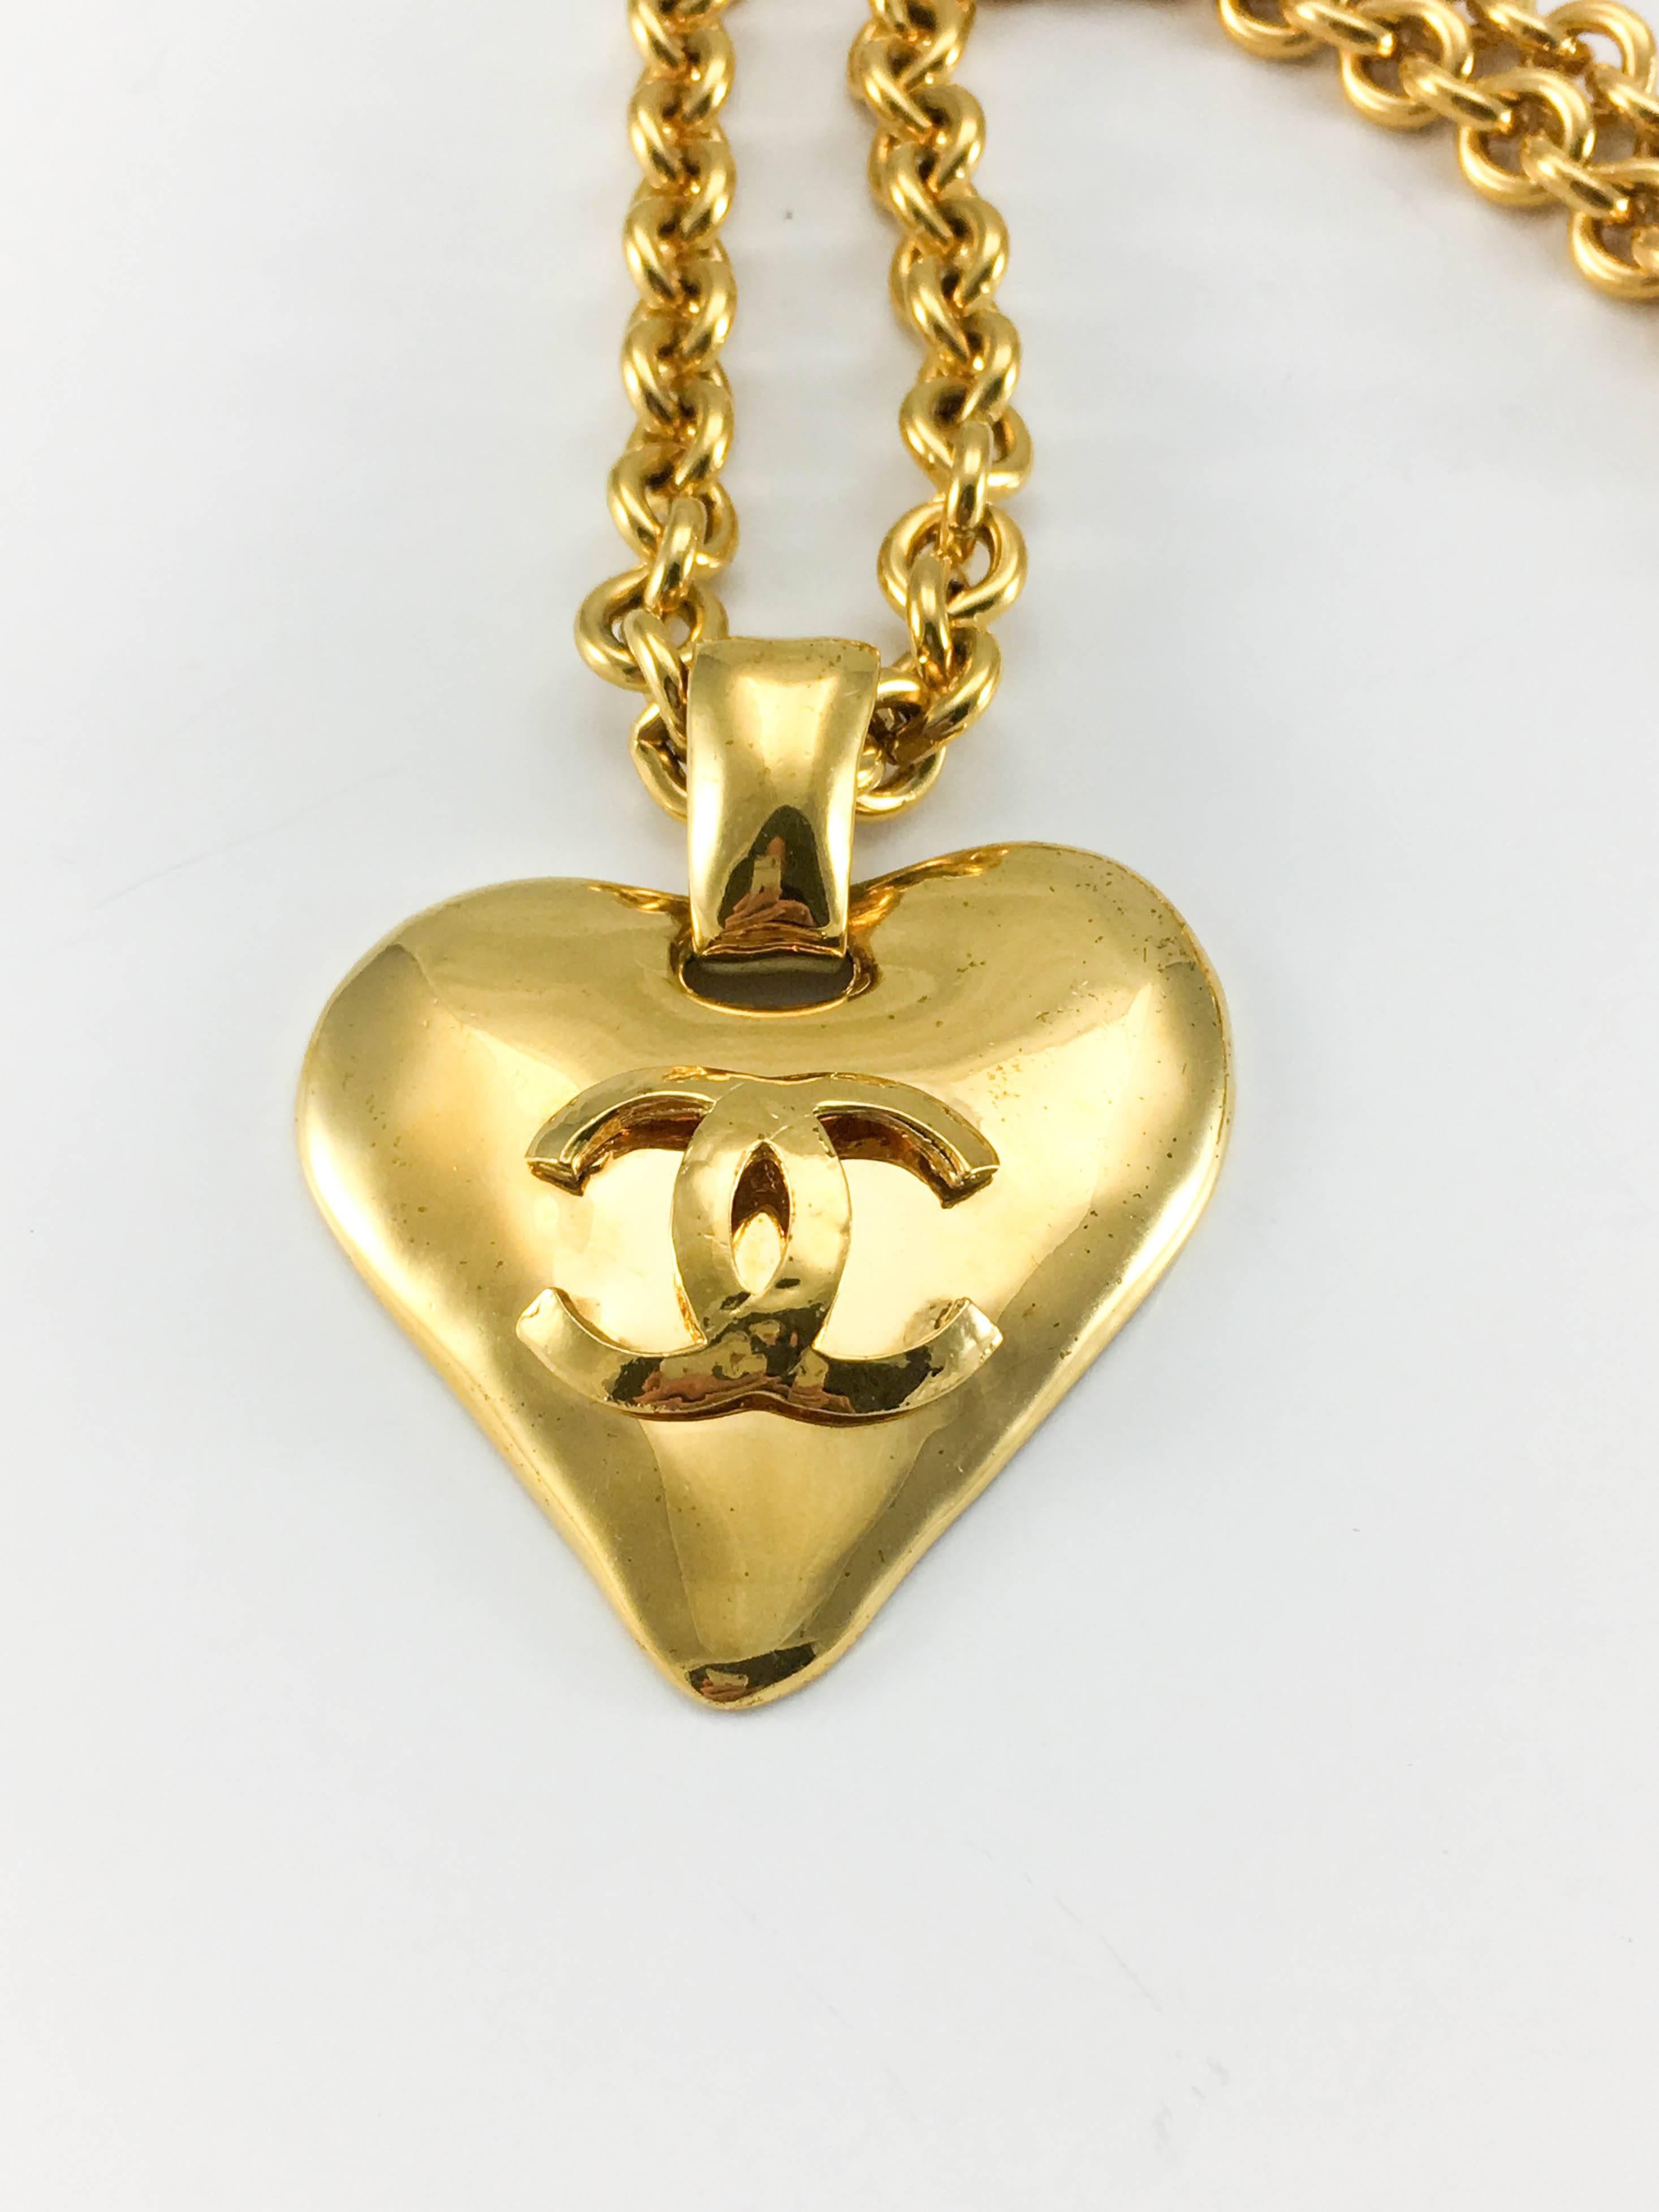 1993 Chanel Heart-Shaped Gold-Plated Pendant Necklace In Excellent Condition In London, Chelsea